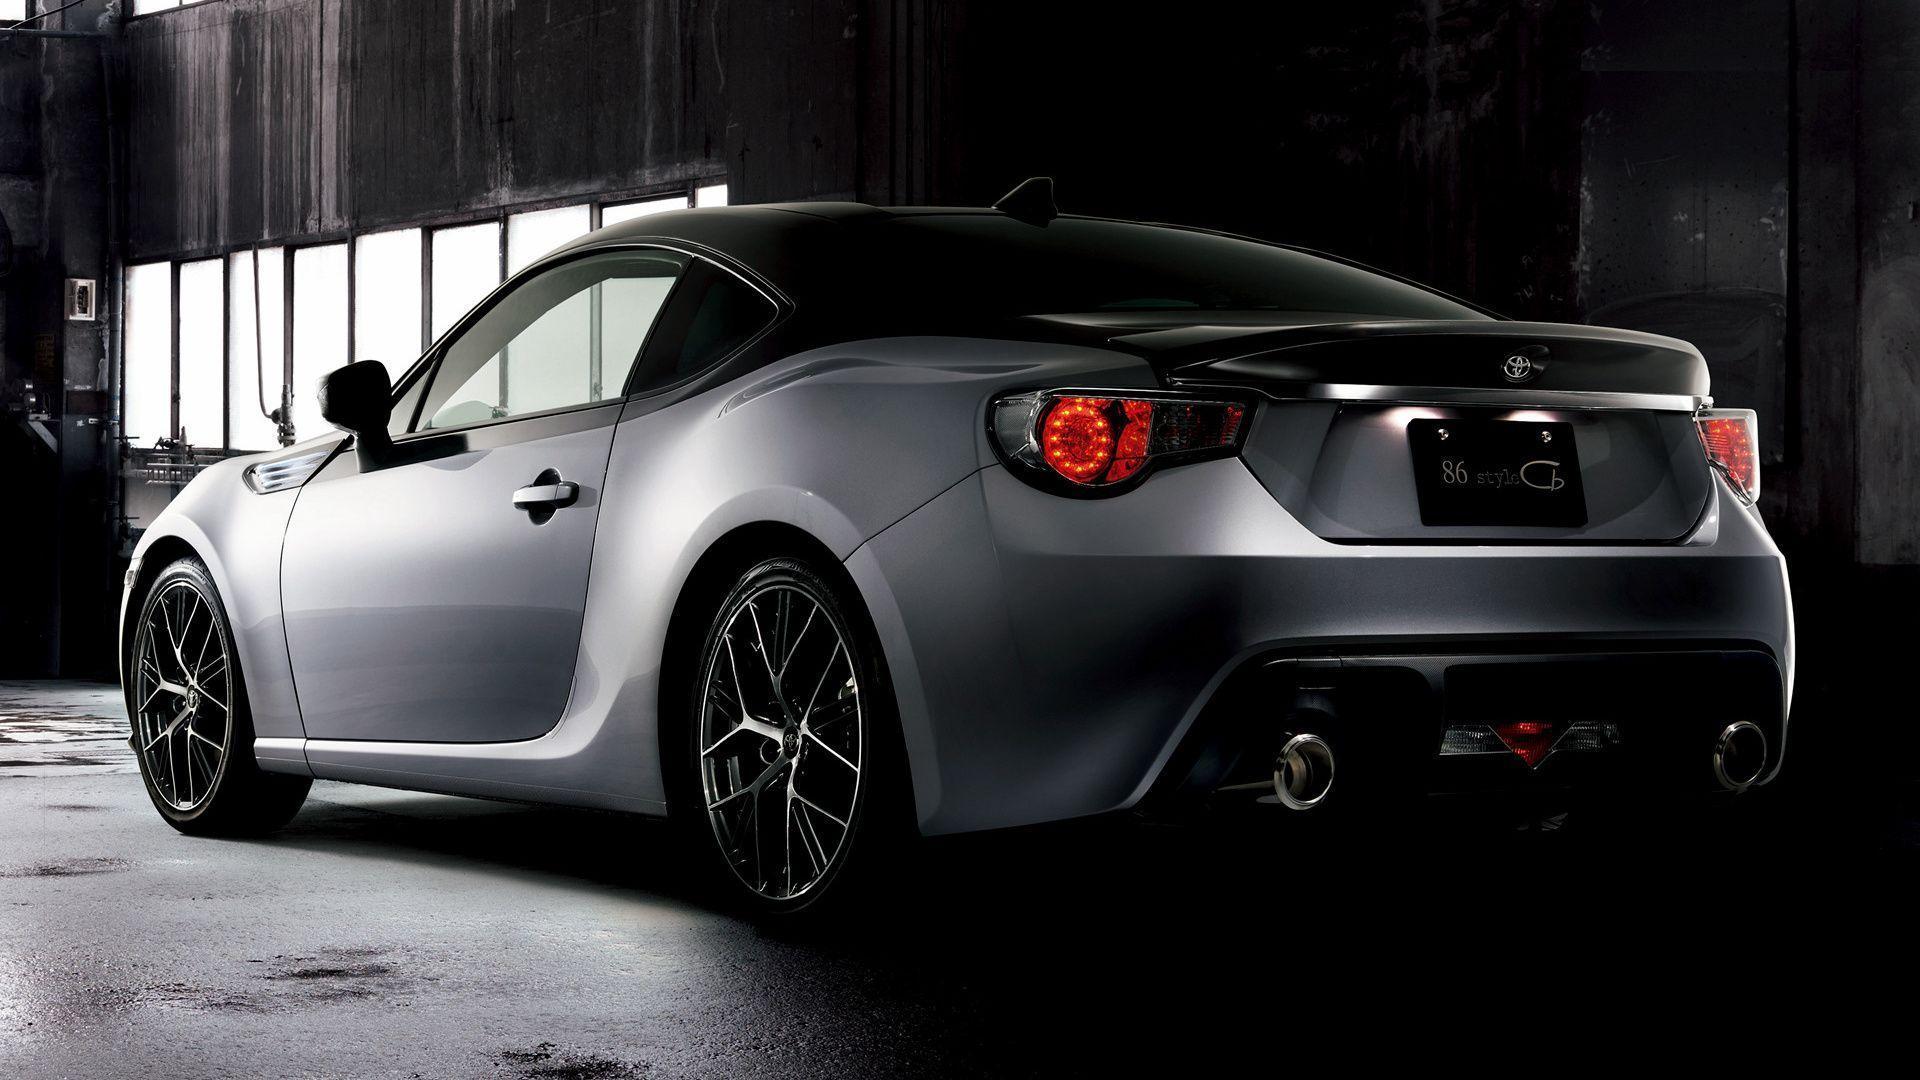 driven-2019-toyota-86-gt-remains-a-compelling-driver-s-car-carscoops